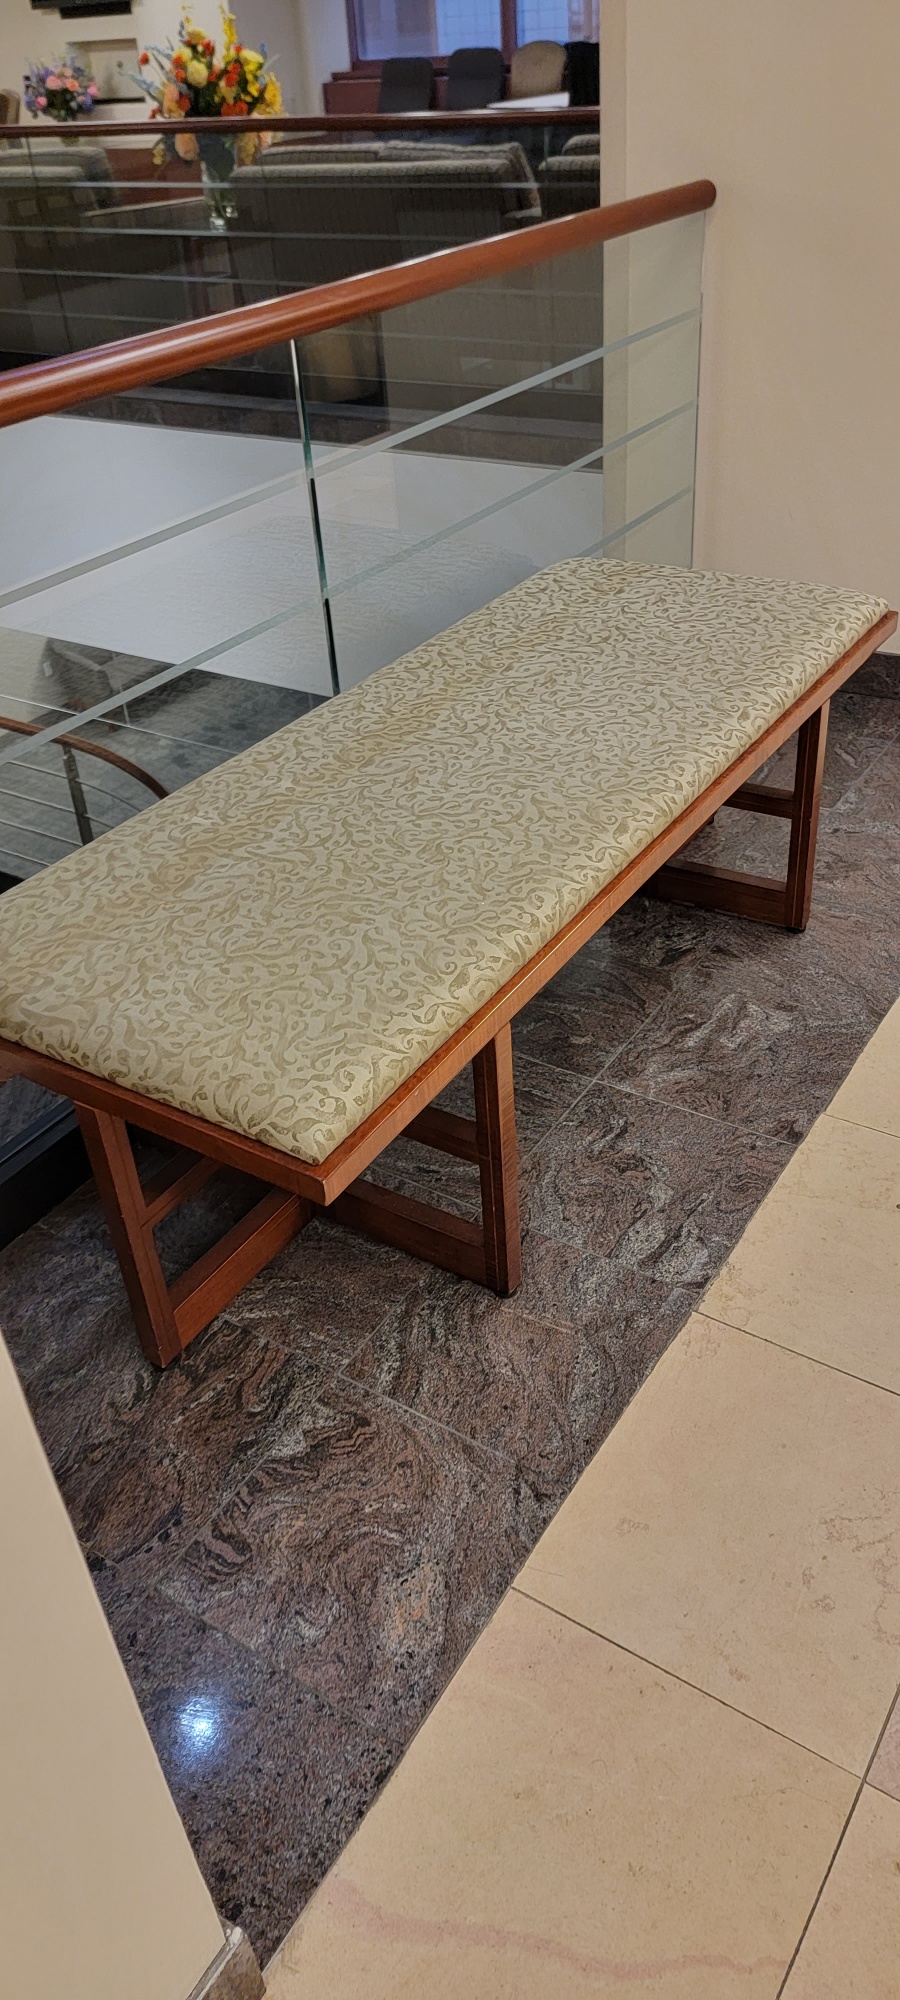 R6302 - Fabric Benches